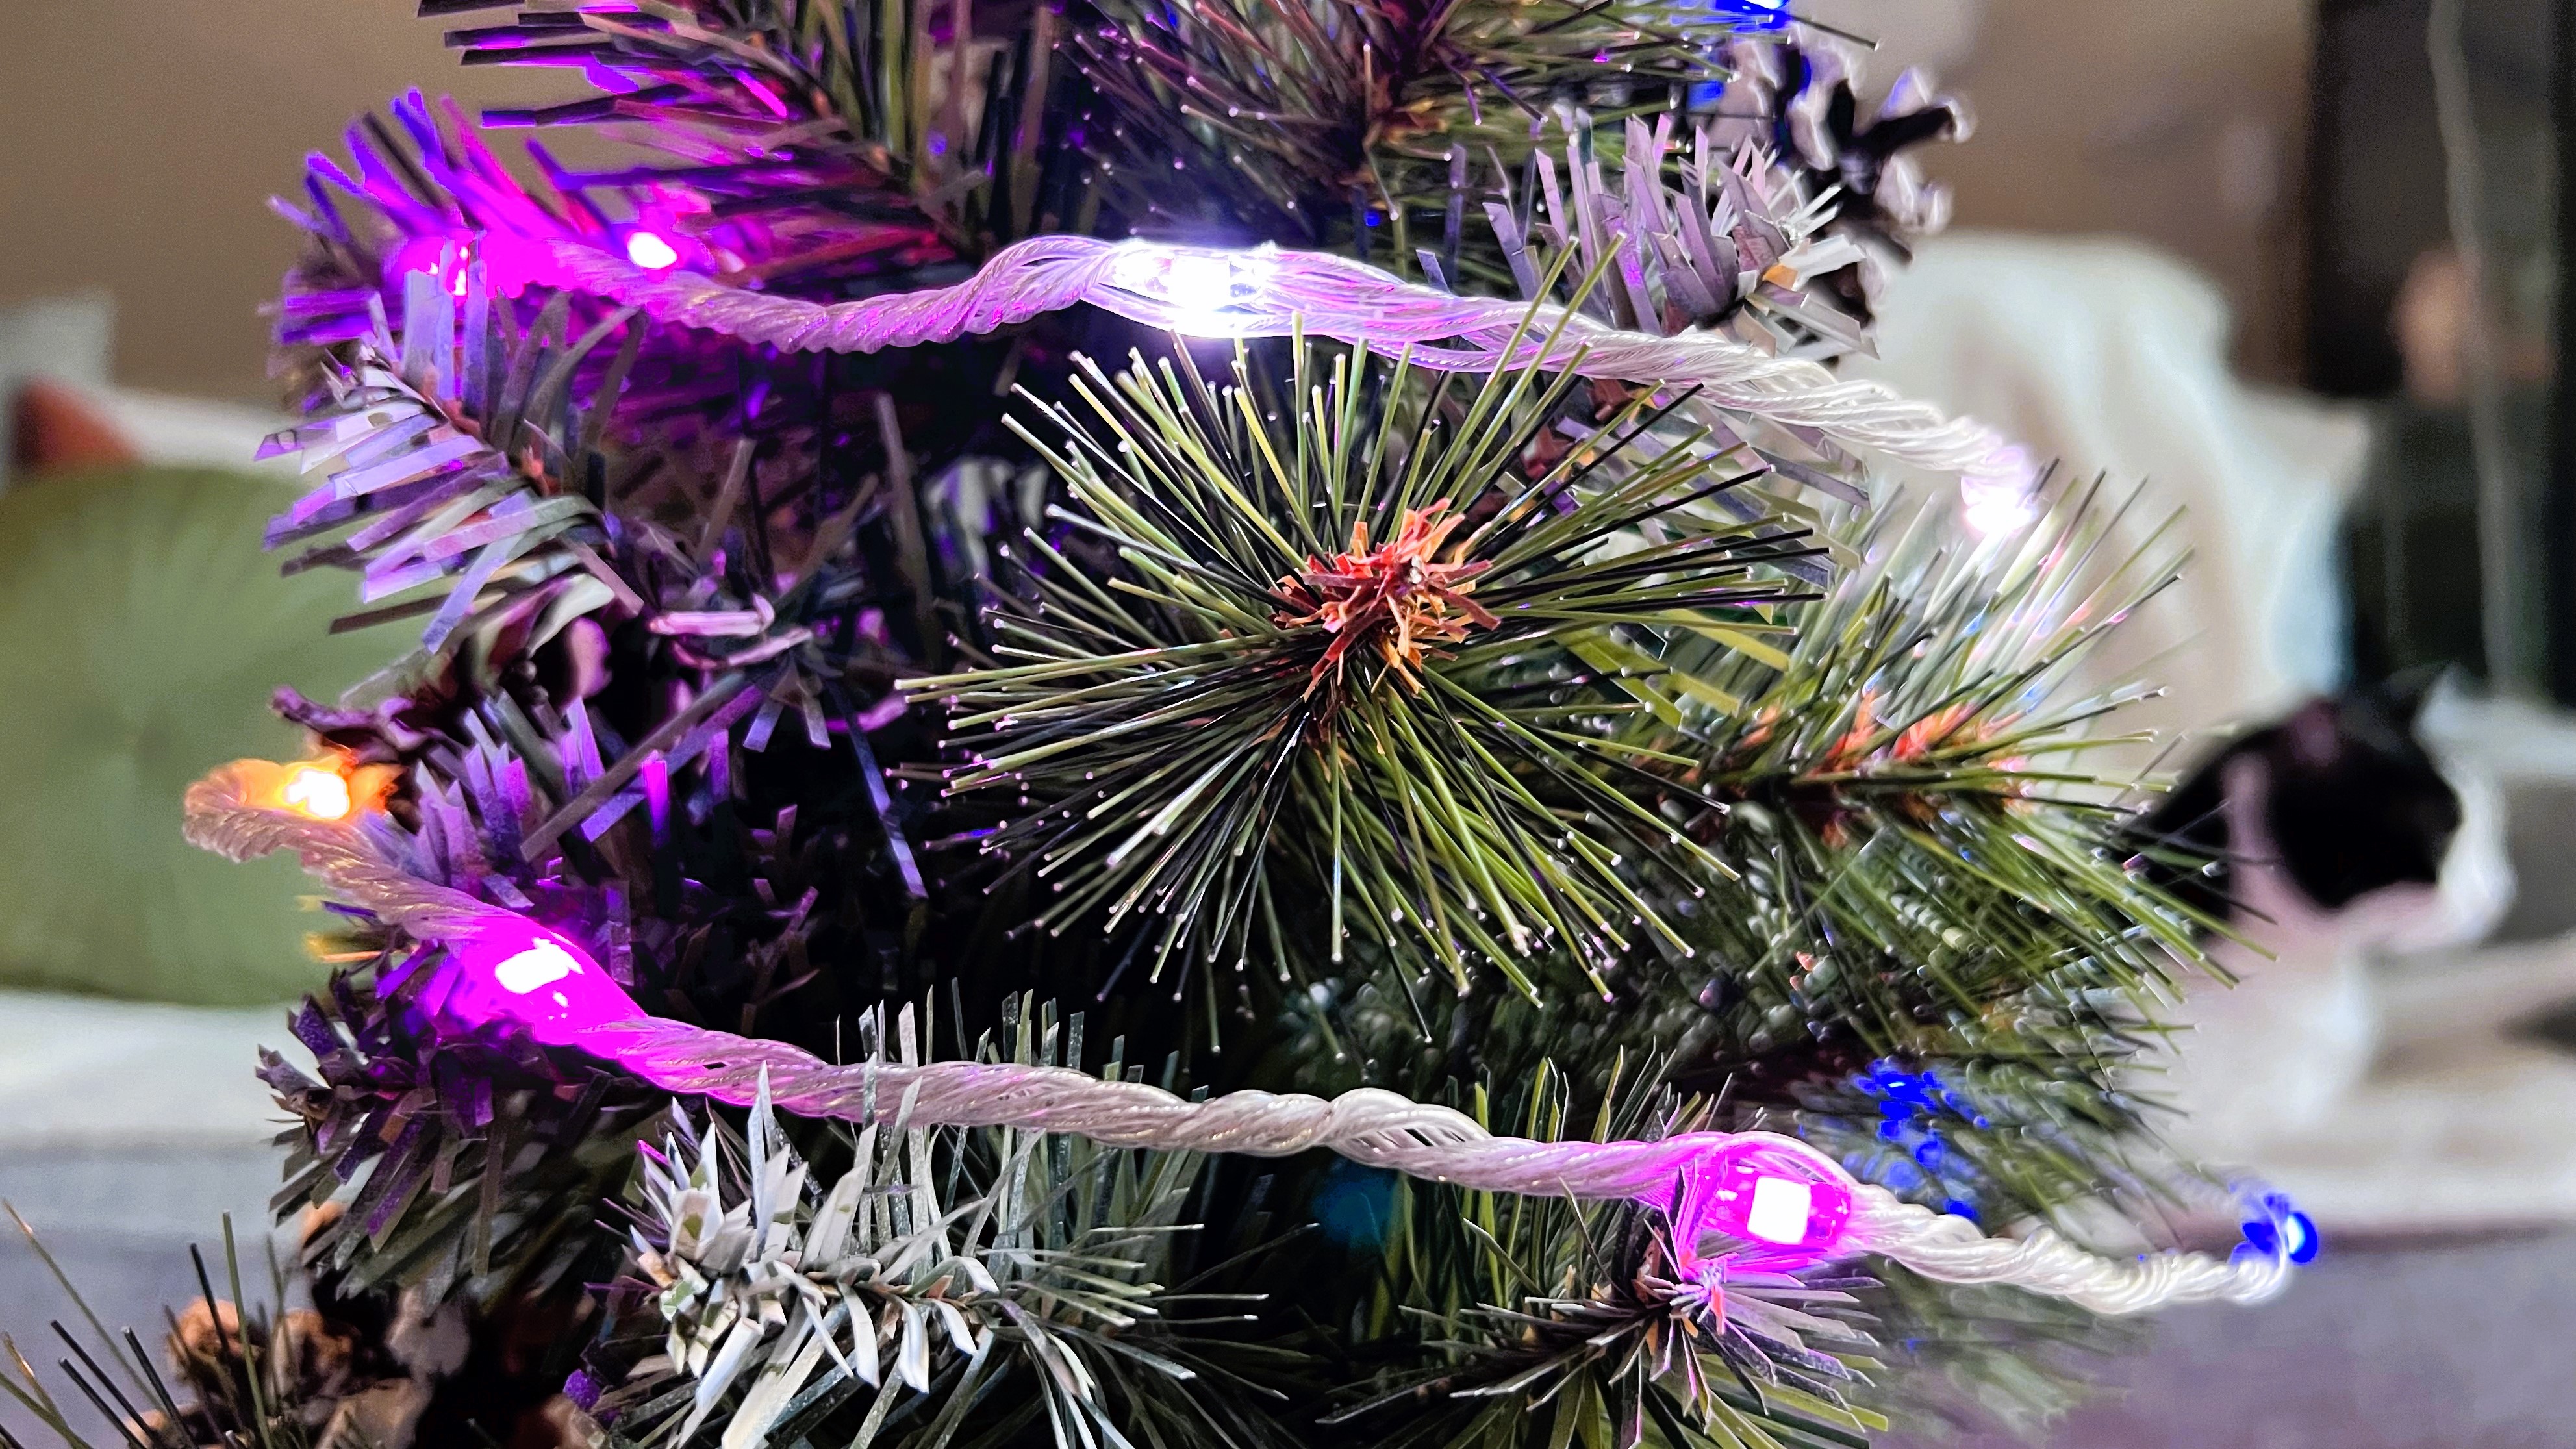 Govee Christmas String Lights on a small tree during testing